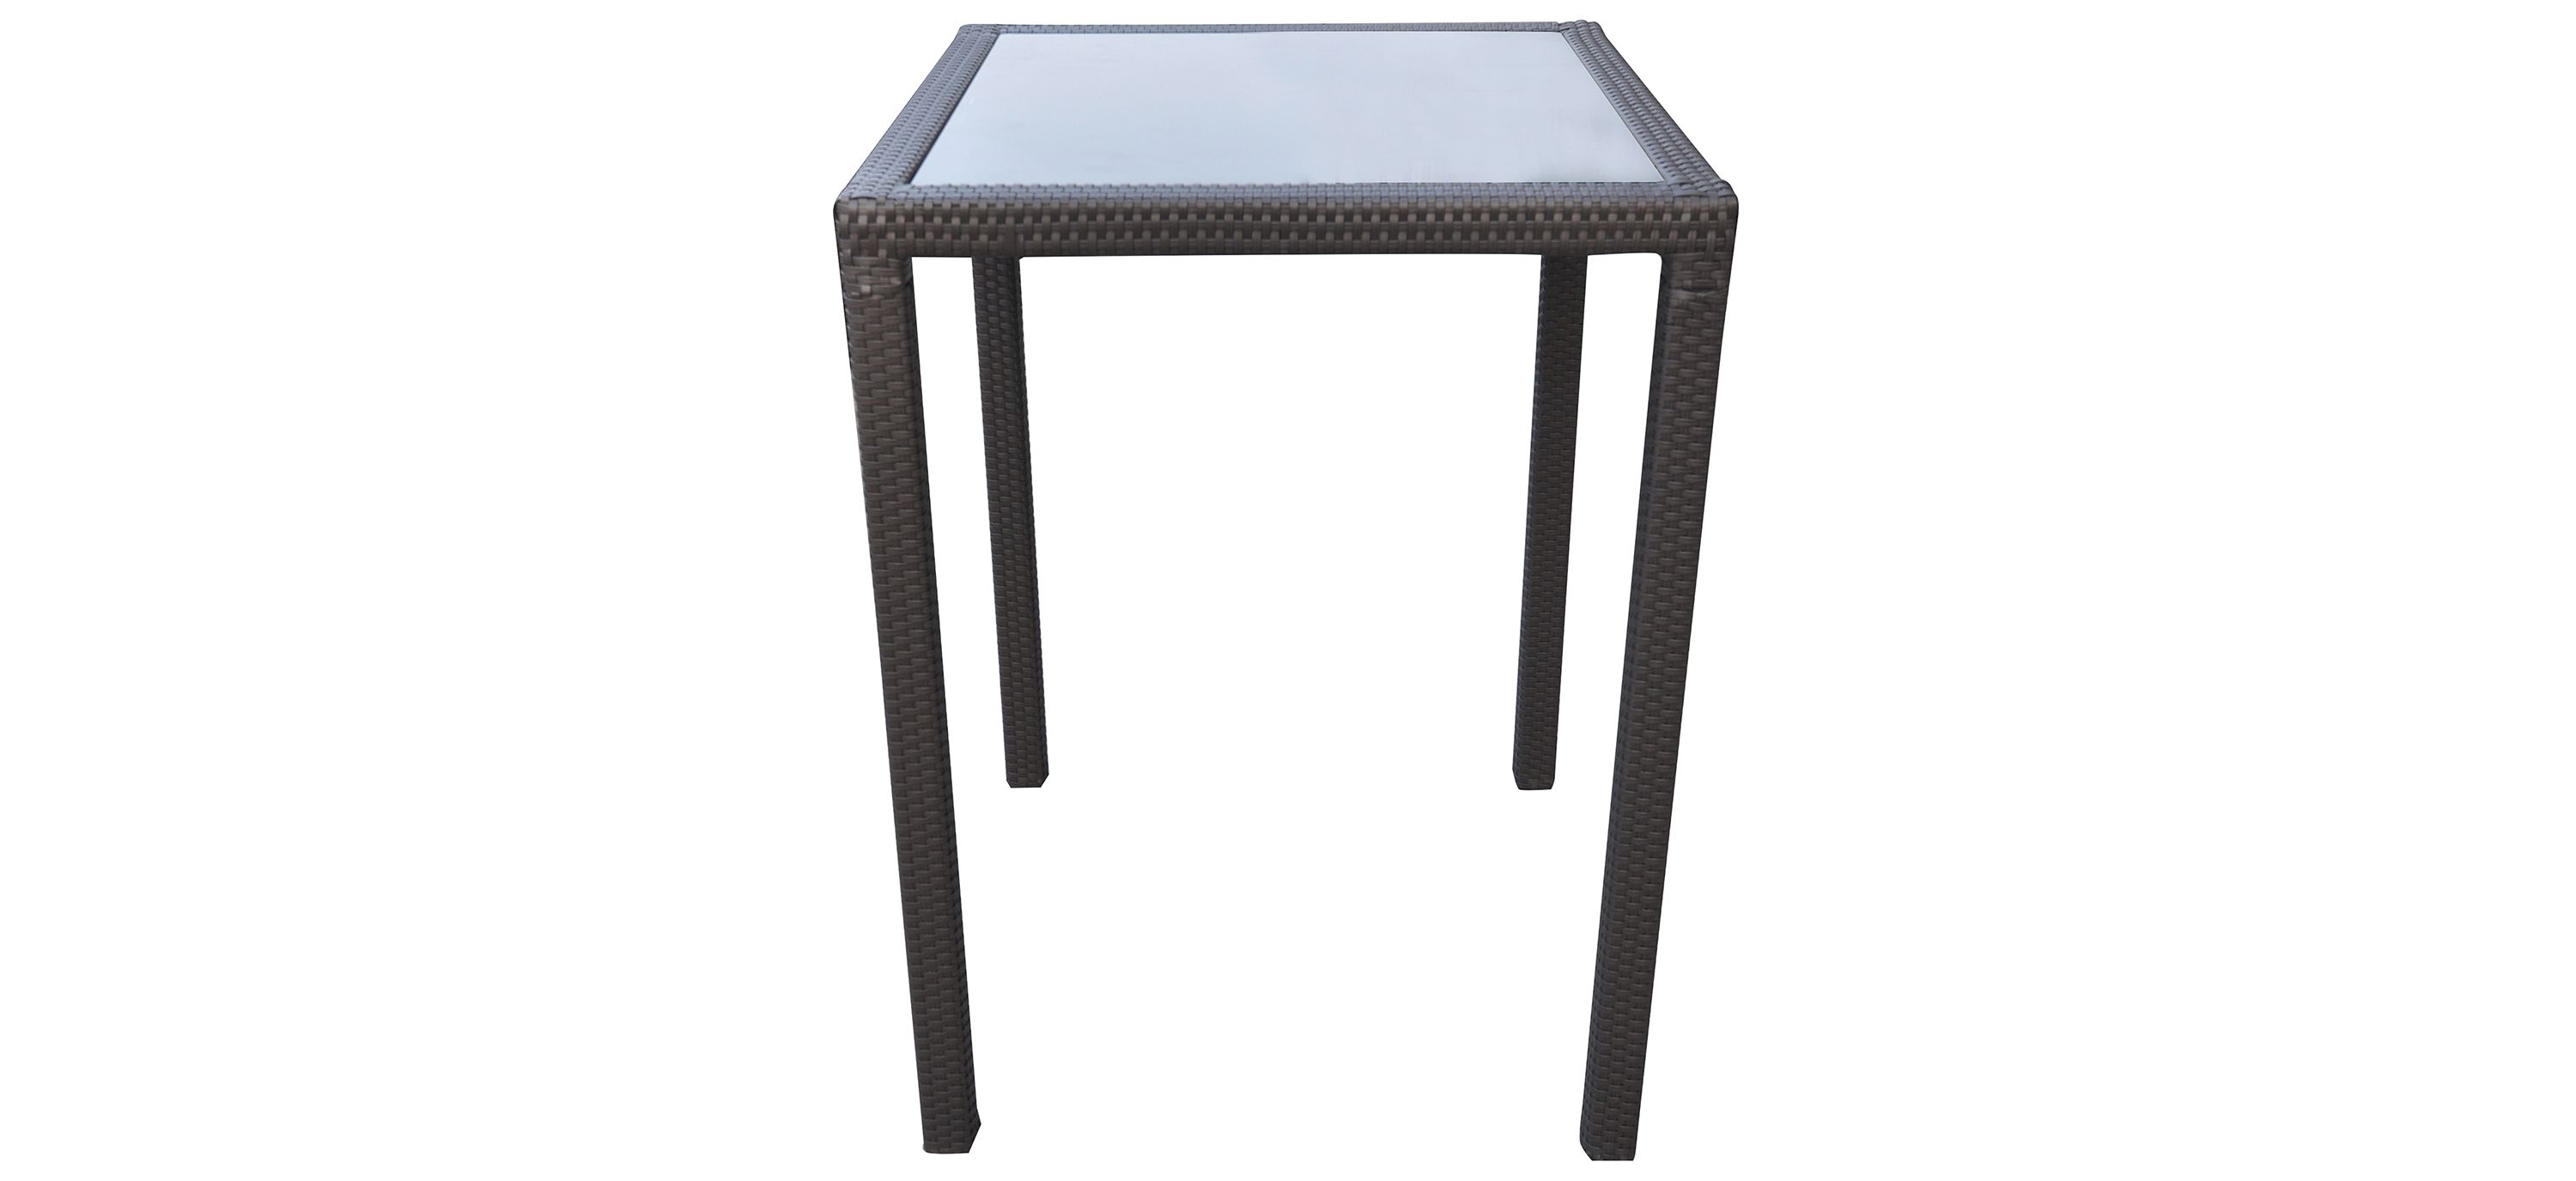 Tropez Square Outdoor Glass-Top Wicker Bar Table